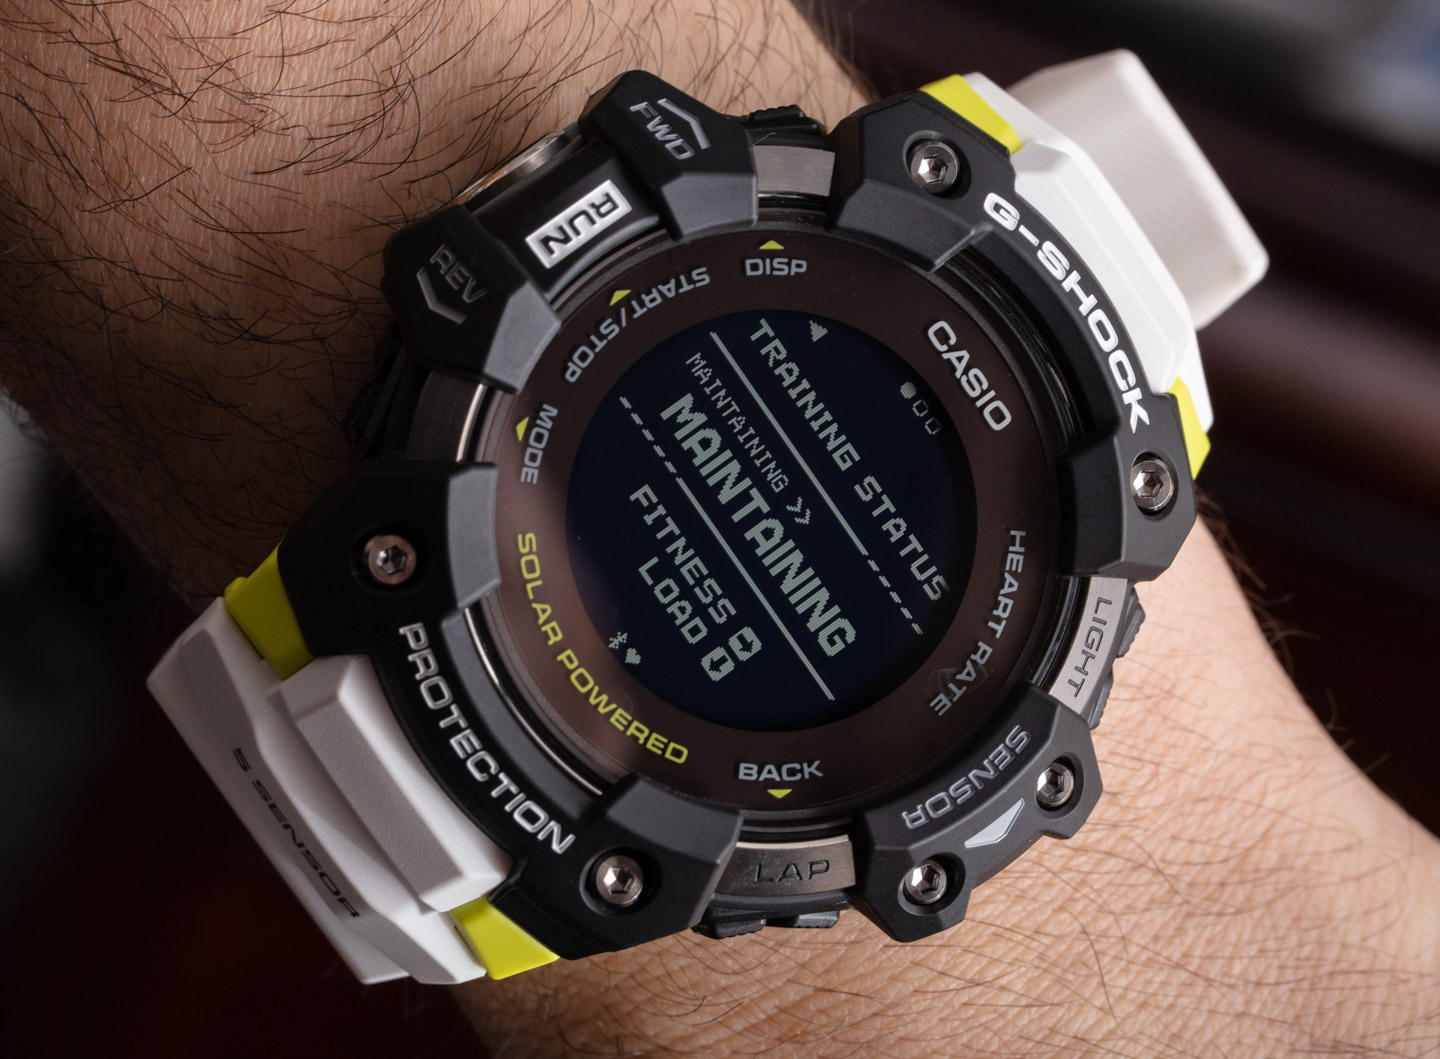 Find Your Way with the Best GPS Watch You Can Get | OutdoorHub